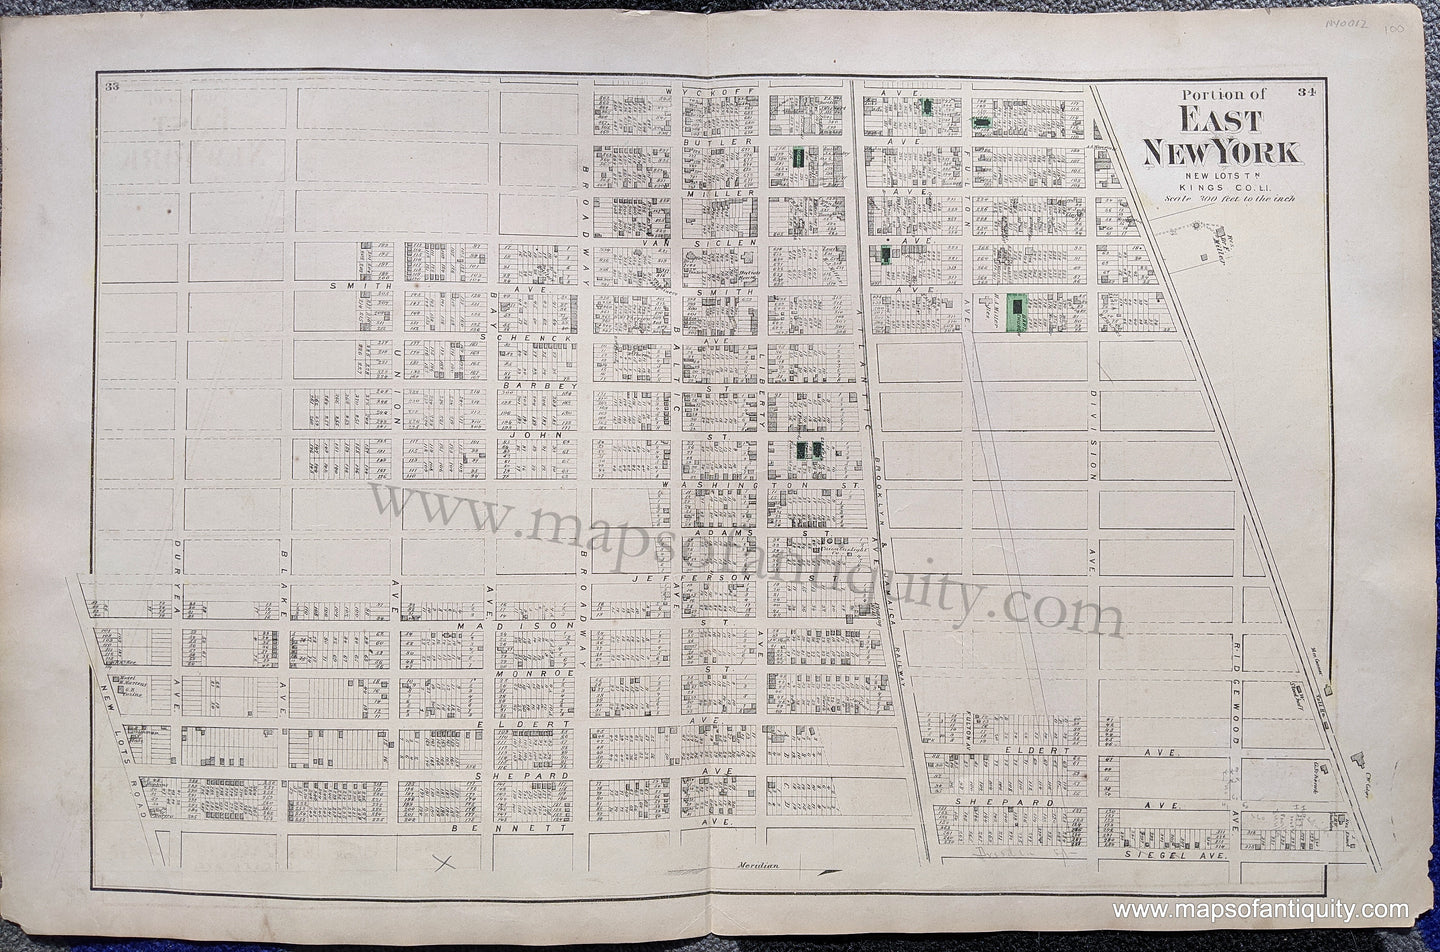 Antique-Hand-Colored-Map-Double-sided-sheet---Centerfold-Portion-of-East-New-York-New-York;-verso-Flatlands-/-Unionville-Guntherville-Gravesend-Flatlands-New-Utrecht-United-States-Northeast-1873-Beers-Maps-Of-Antiquity